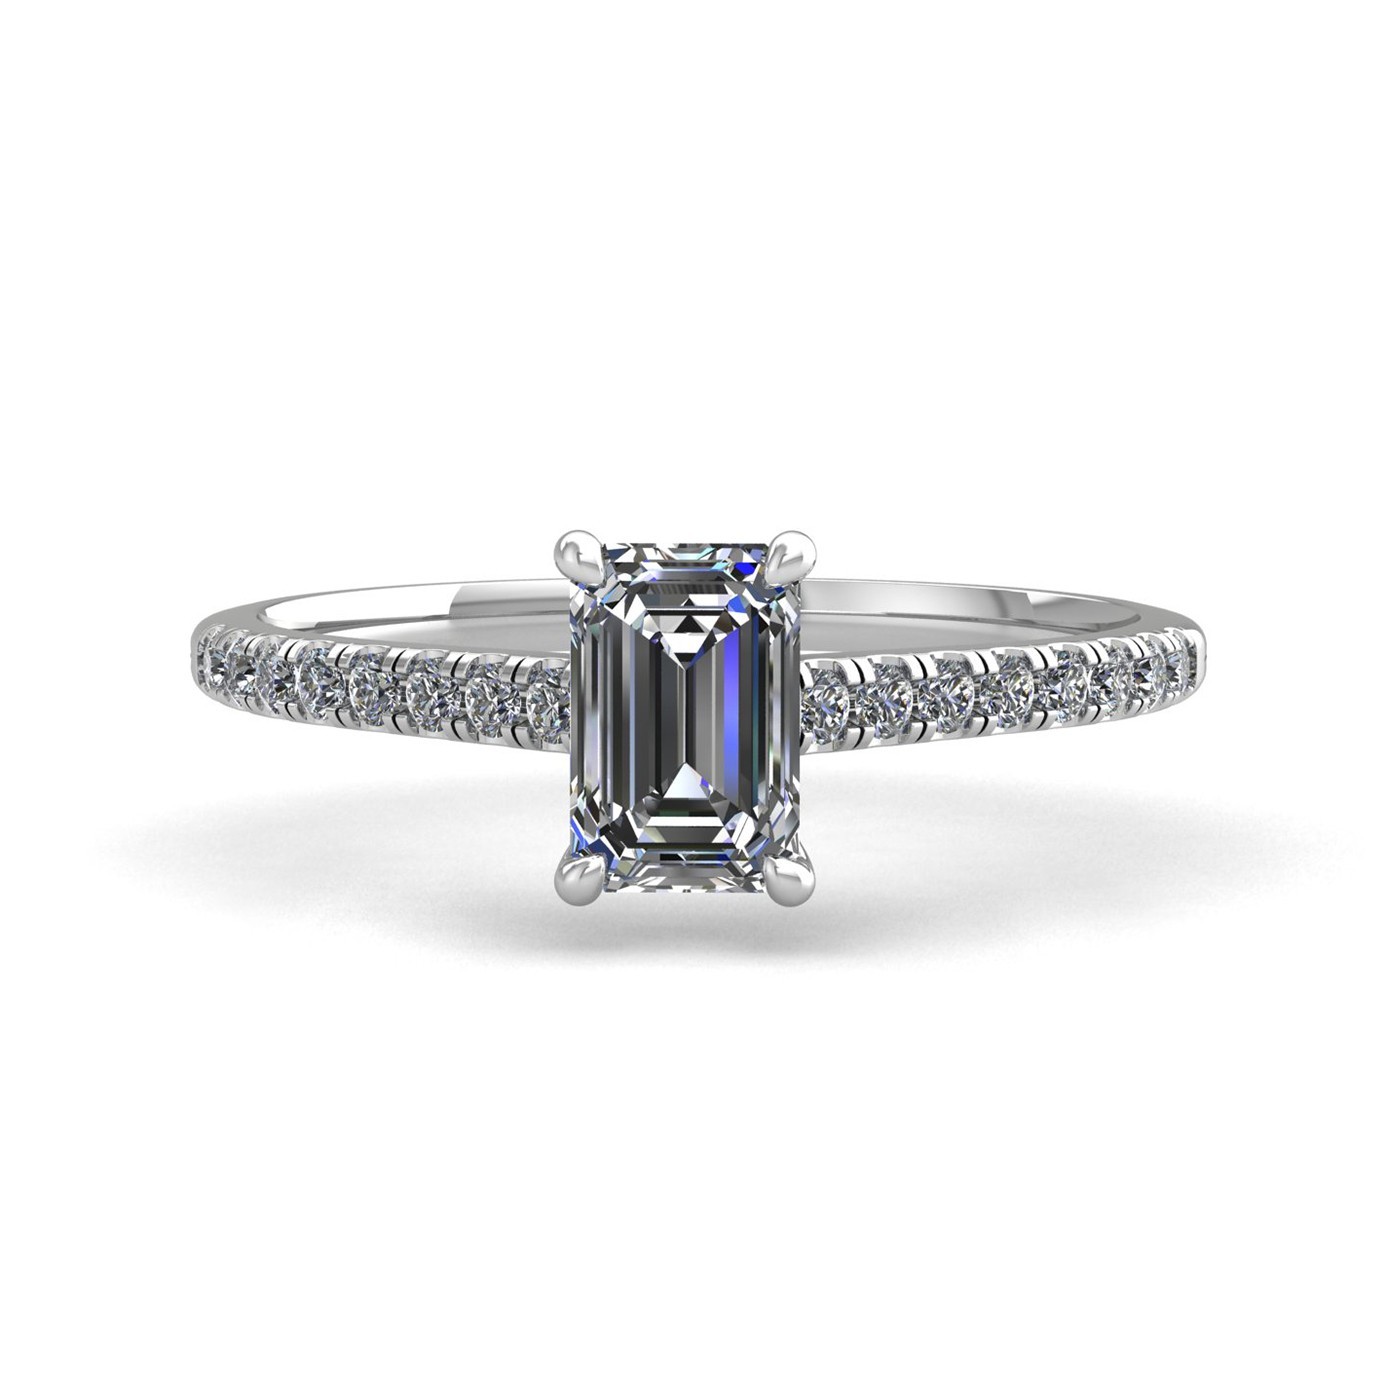 18k white gold 0,30 ct 4 prongs emerald cut diamond engagement ring with whisper thin pavÉ set band Photos & images